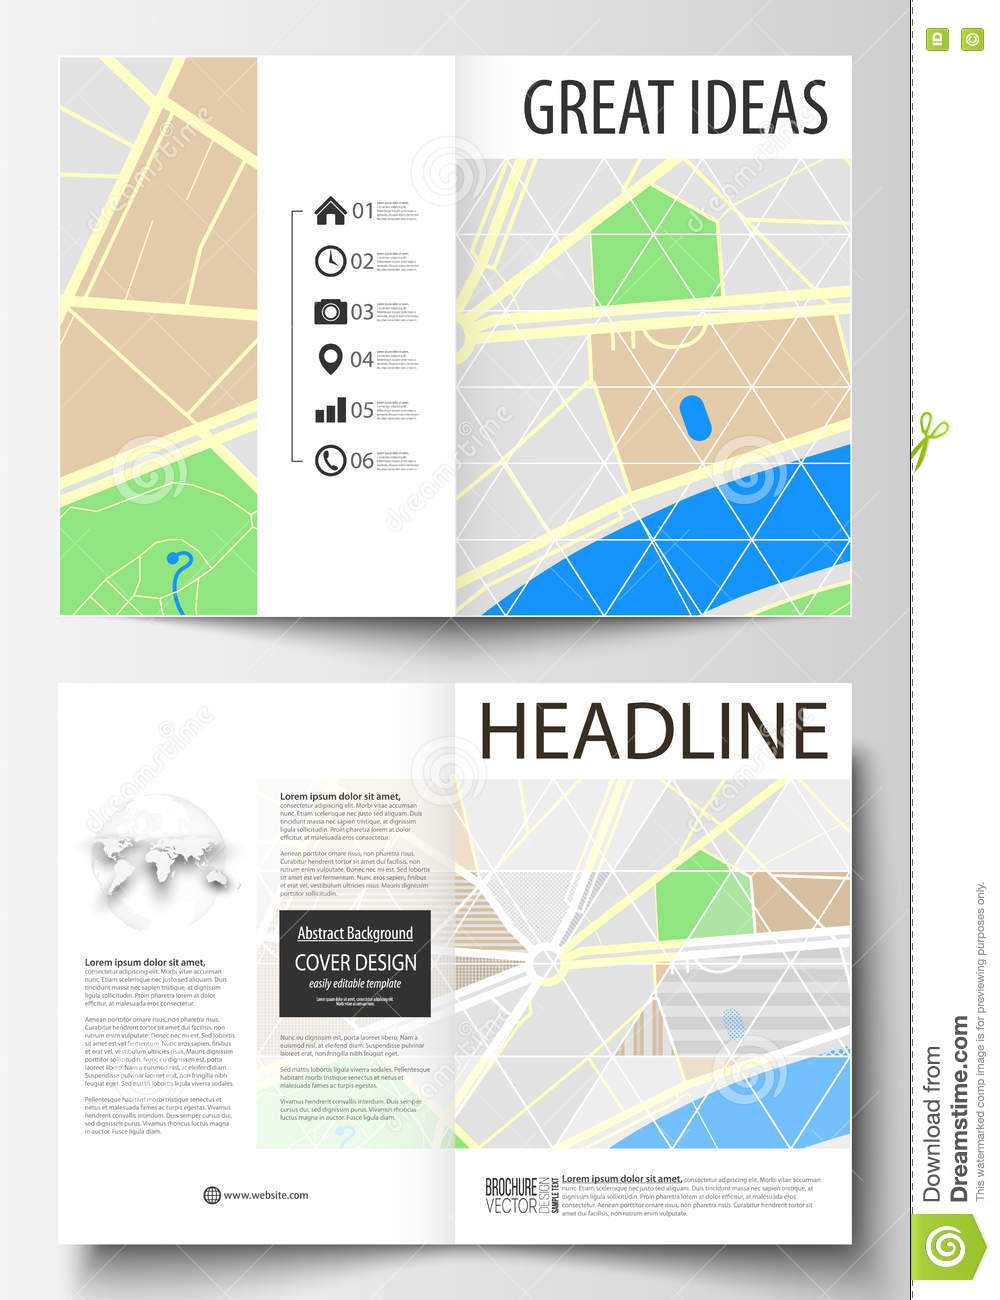 Business Templates For Bi Fold Brochure, Magazine, Flyer Or Within Blank City Map Template